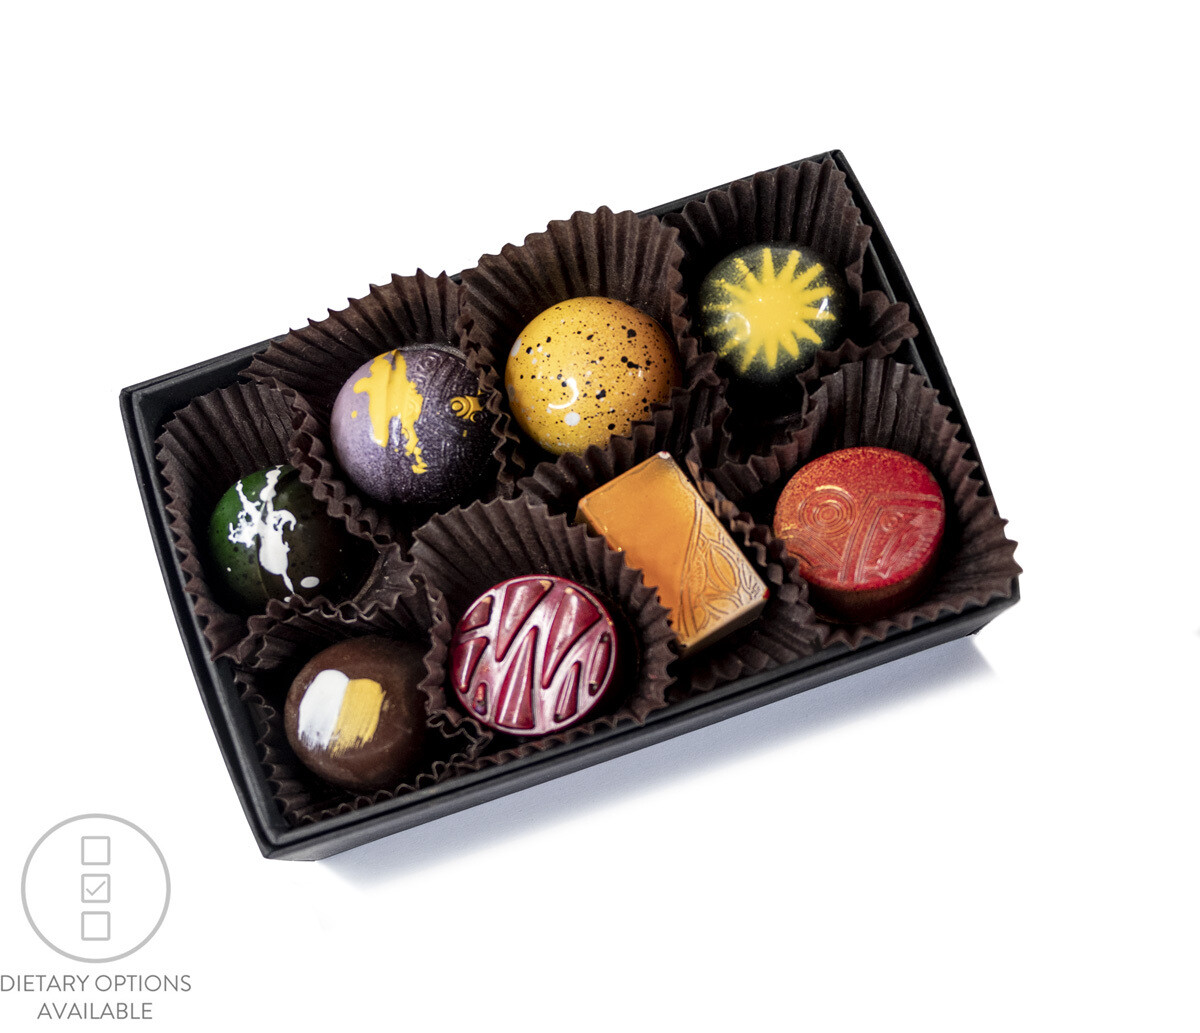 8-Piece Box of Assorted Confections